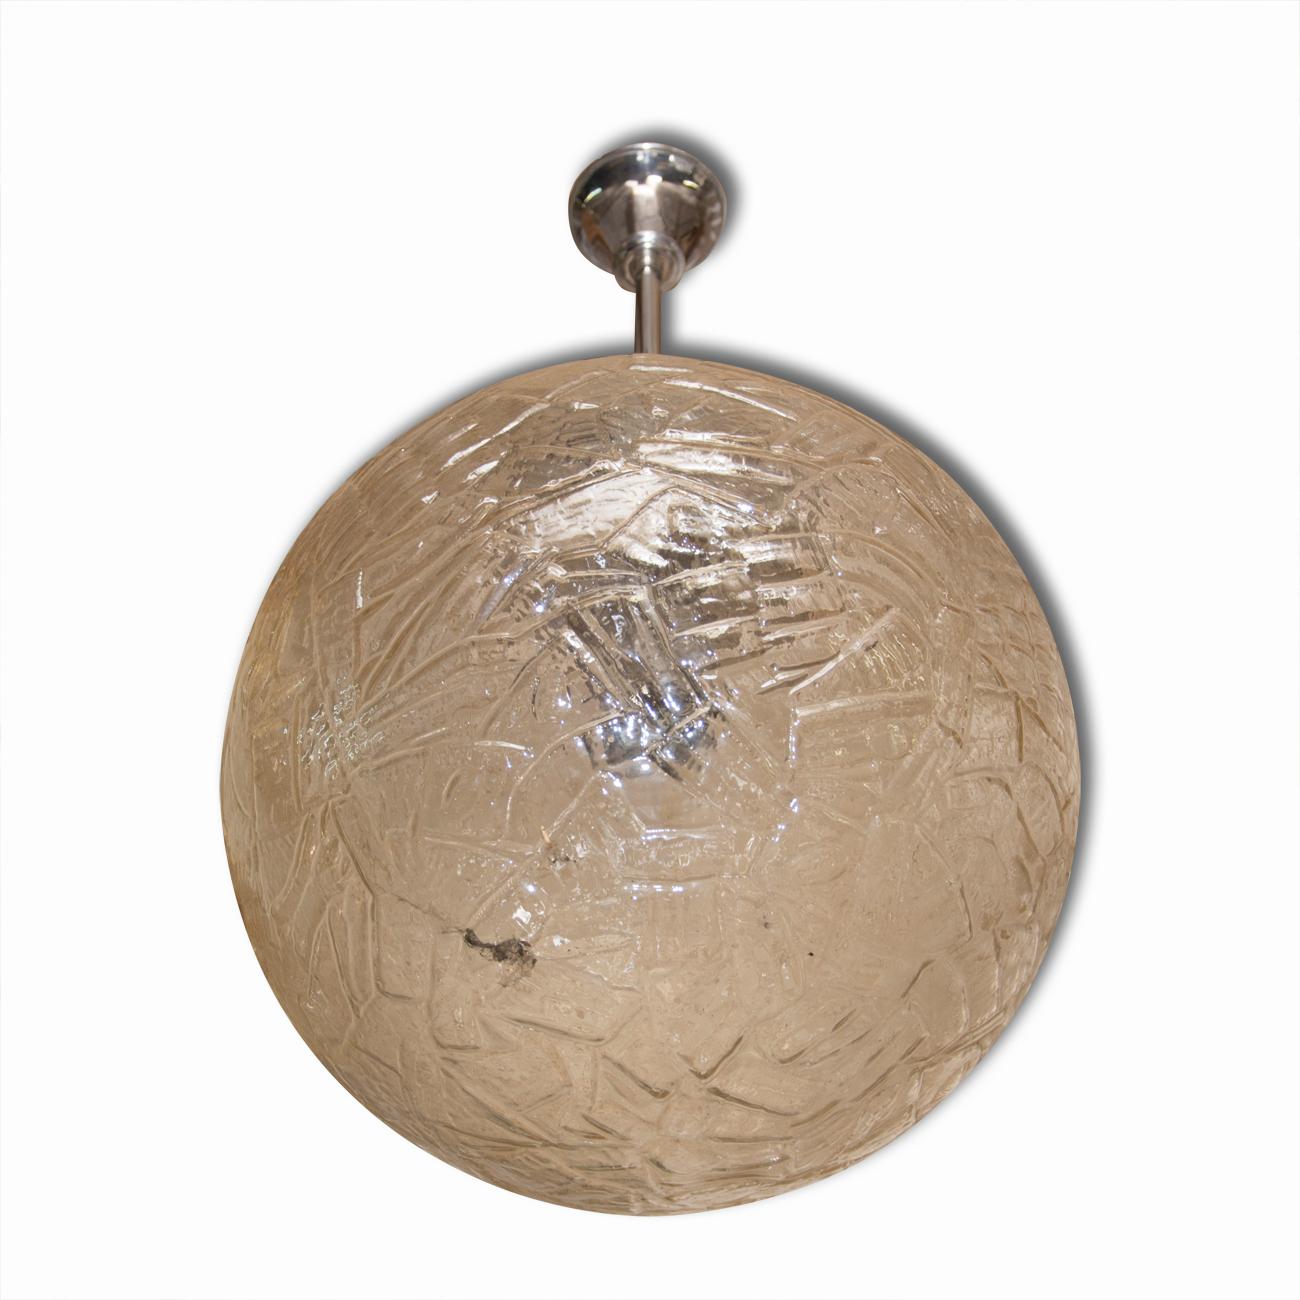 Midcentury Czechoslovak large round pendant lamp with a frozen glass shade. Made in the 1960s. An excellent quality piece, it features a frozen glass shade and chromed rod. In very good vintage condition, consistent with age and use. Original